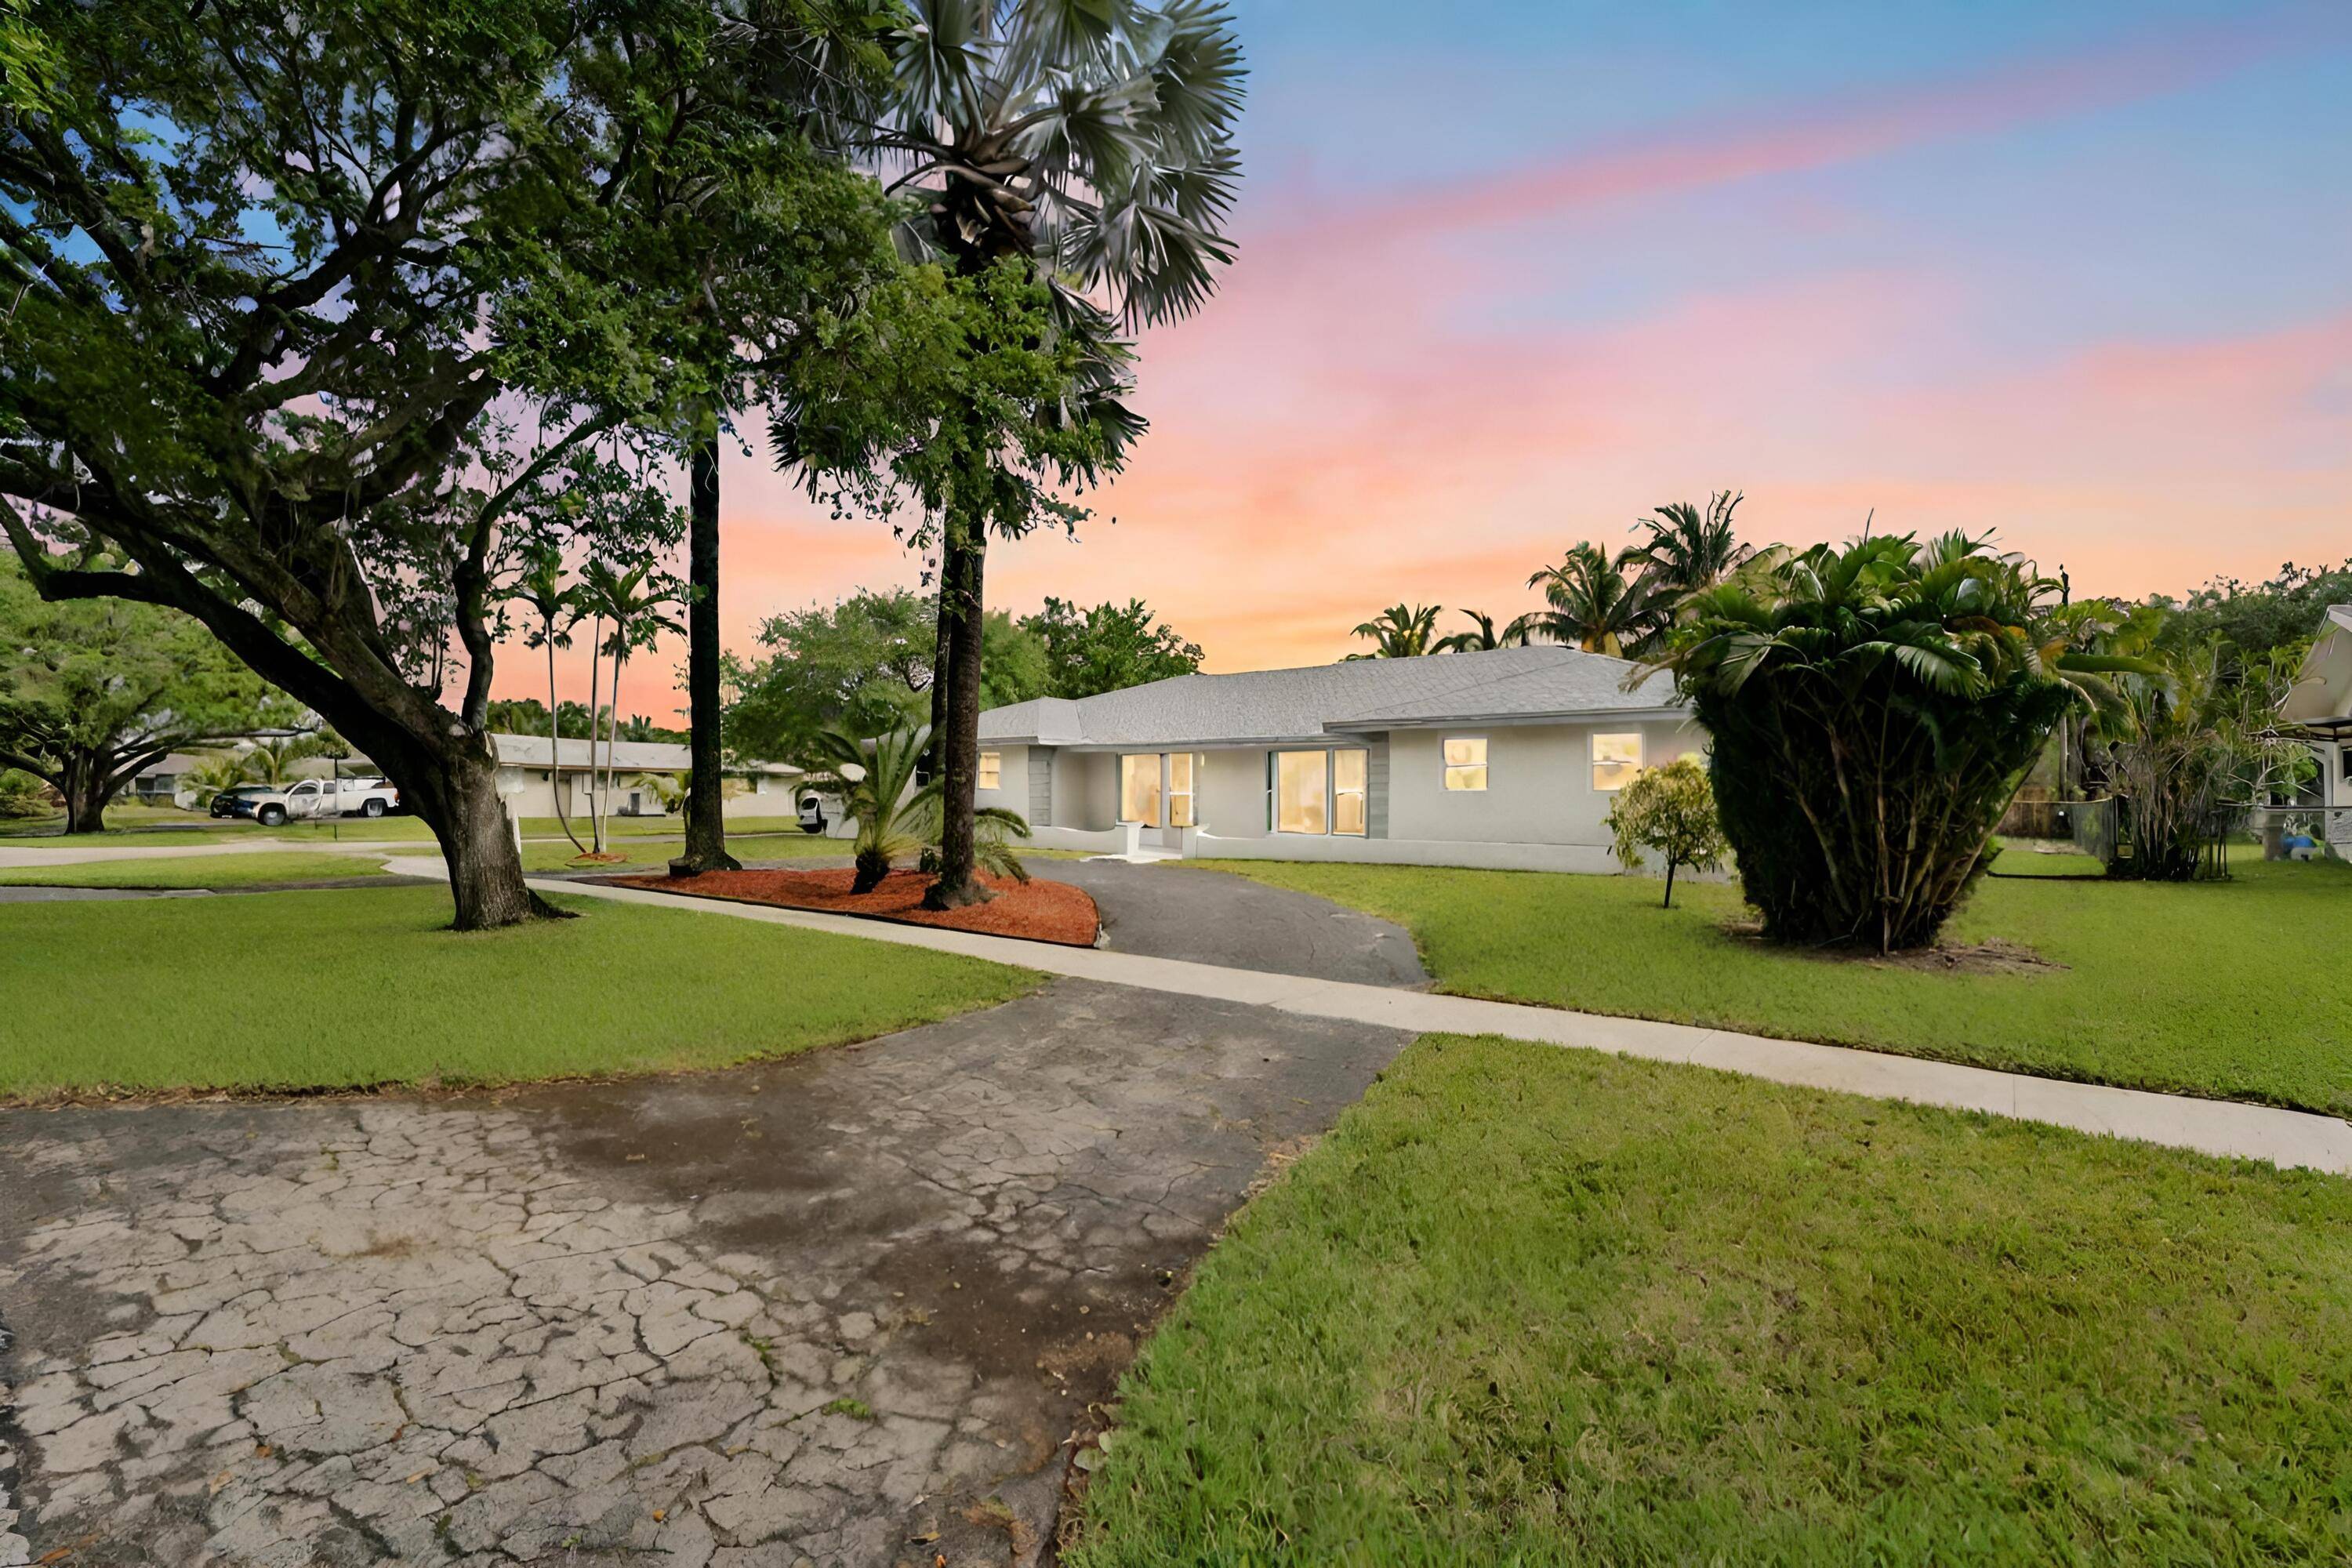 Discover this standout residence in Plantation, a RANCH STYLE LUXURY POOL HOME situated on an OVERSIZE CORNER LOT.